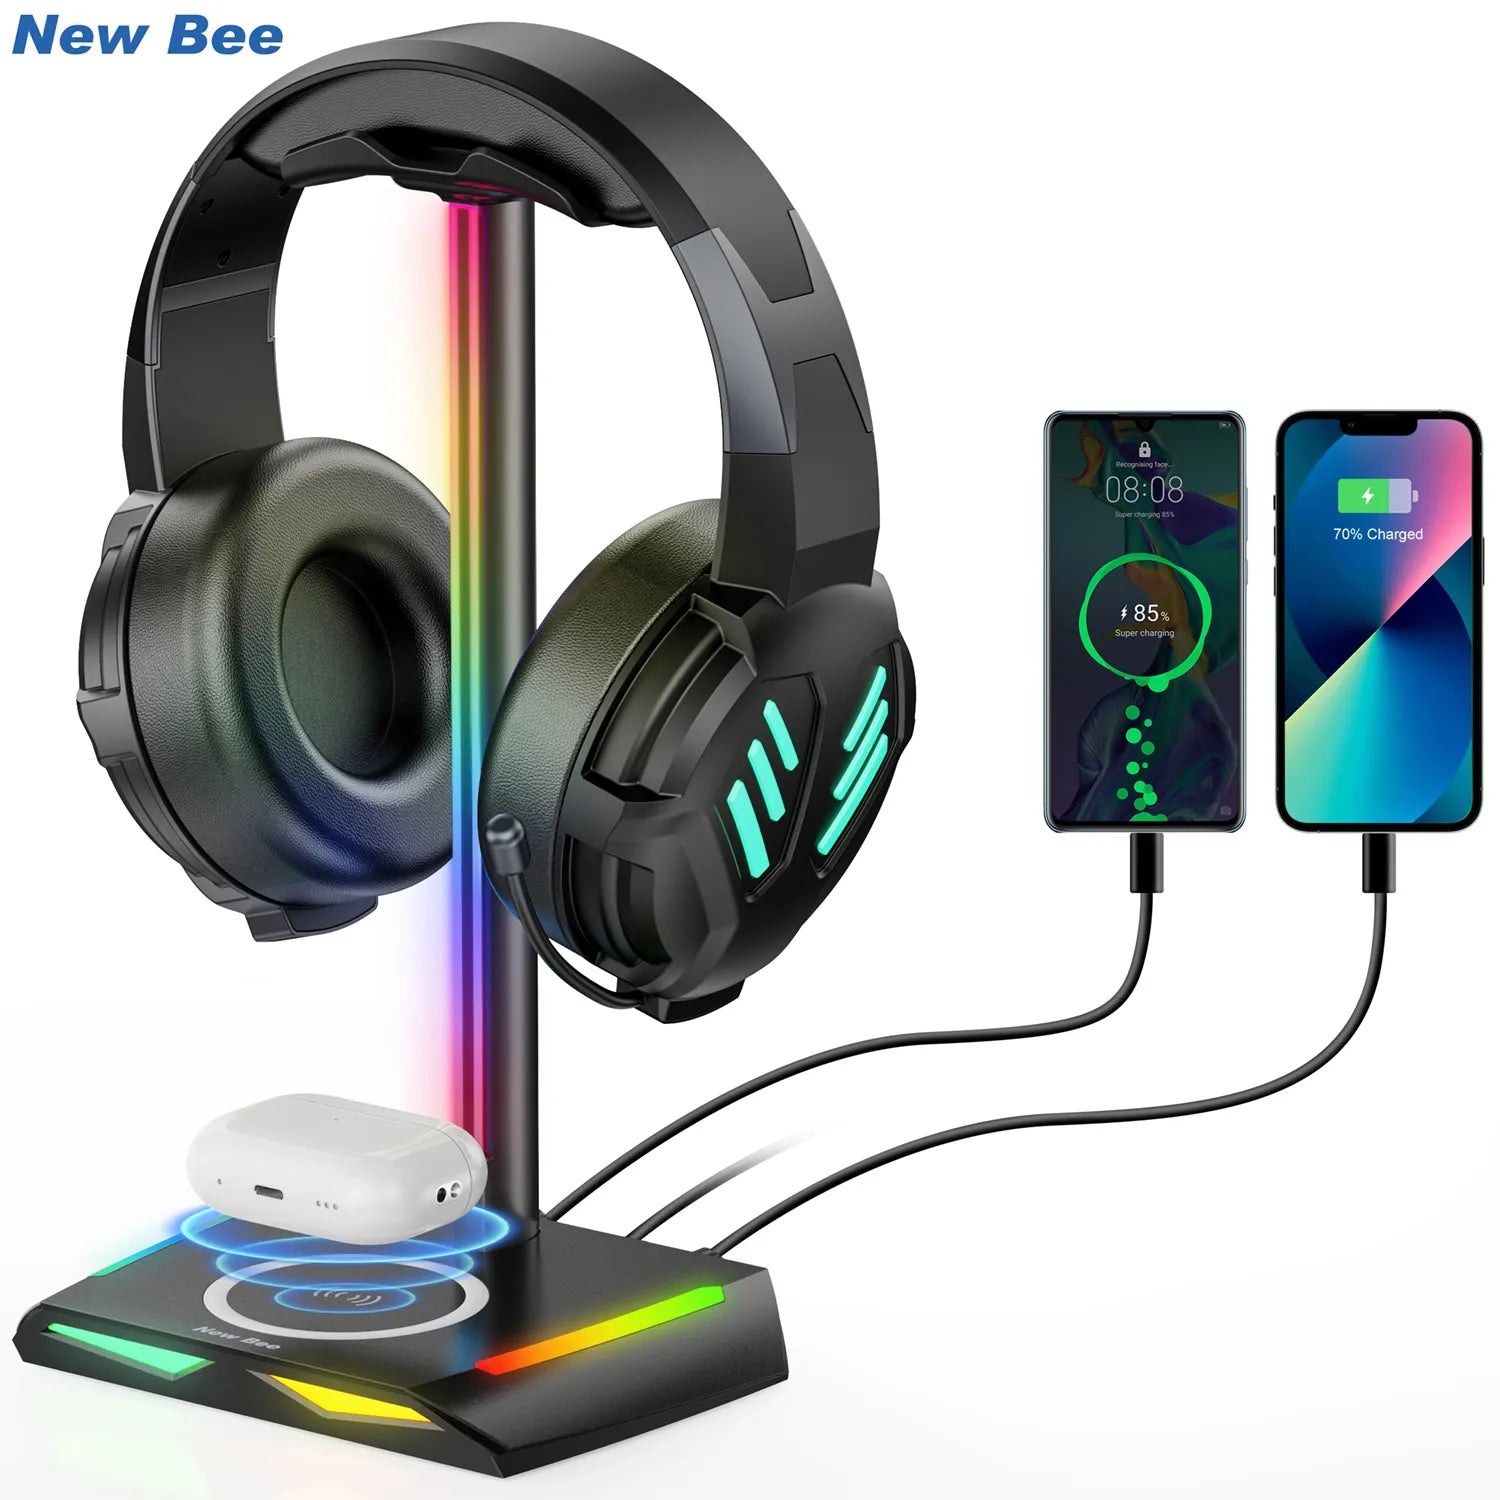 New Bee Z12 RGB Headphones Stand Holder with Wireless Charger Base Desk Gaming Headset Holder Non-Slip Rubber Base